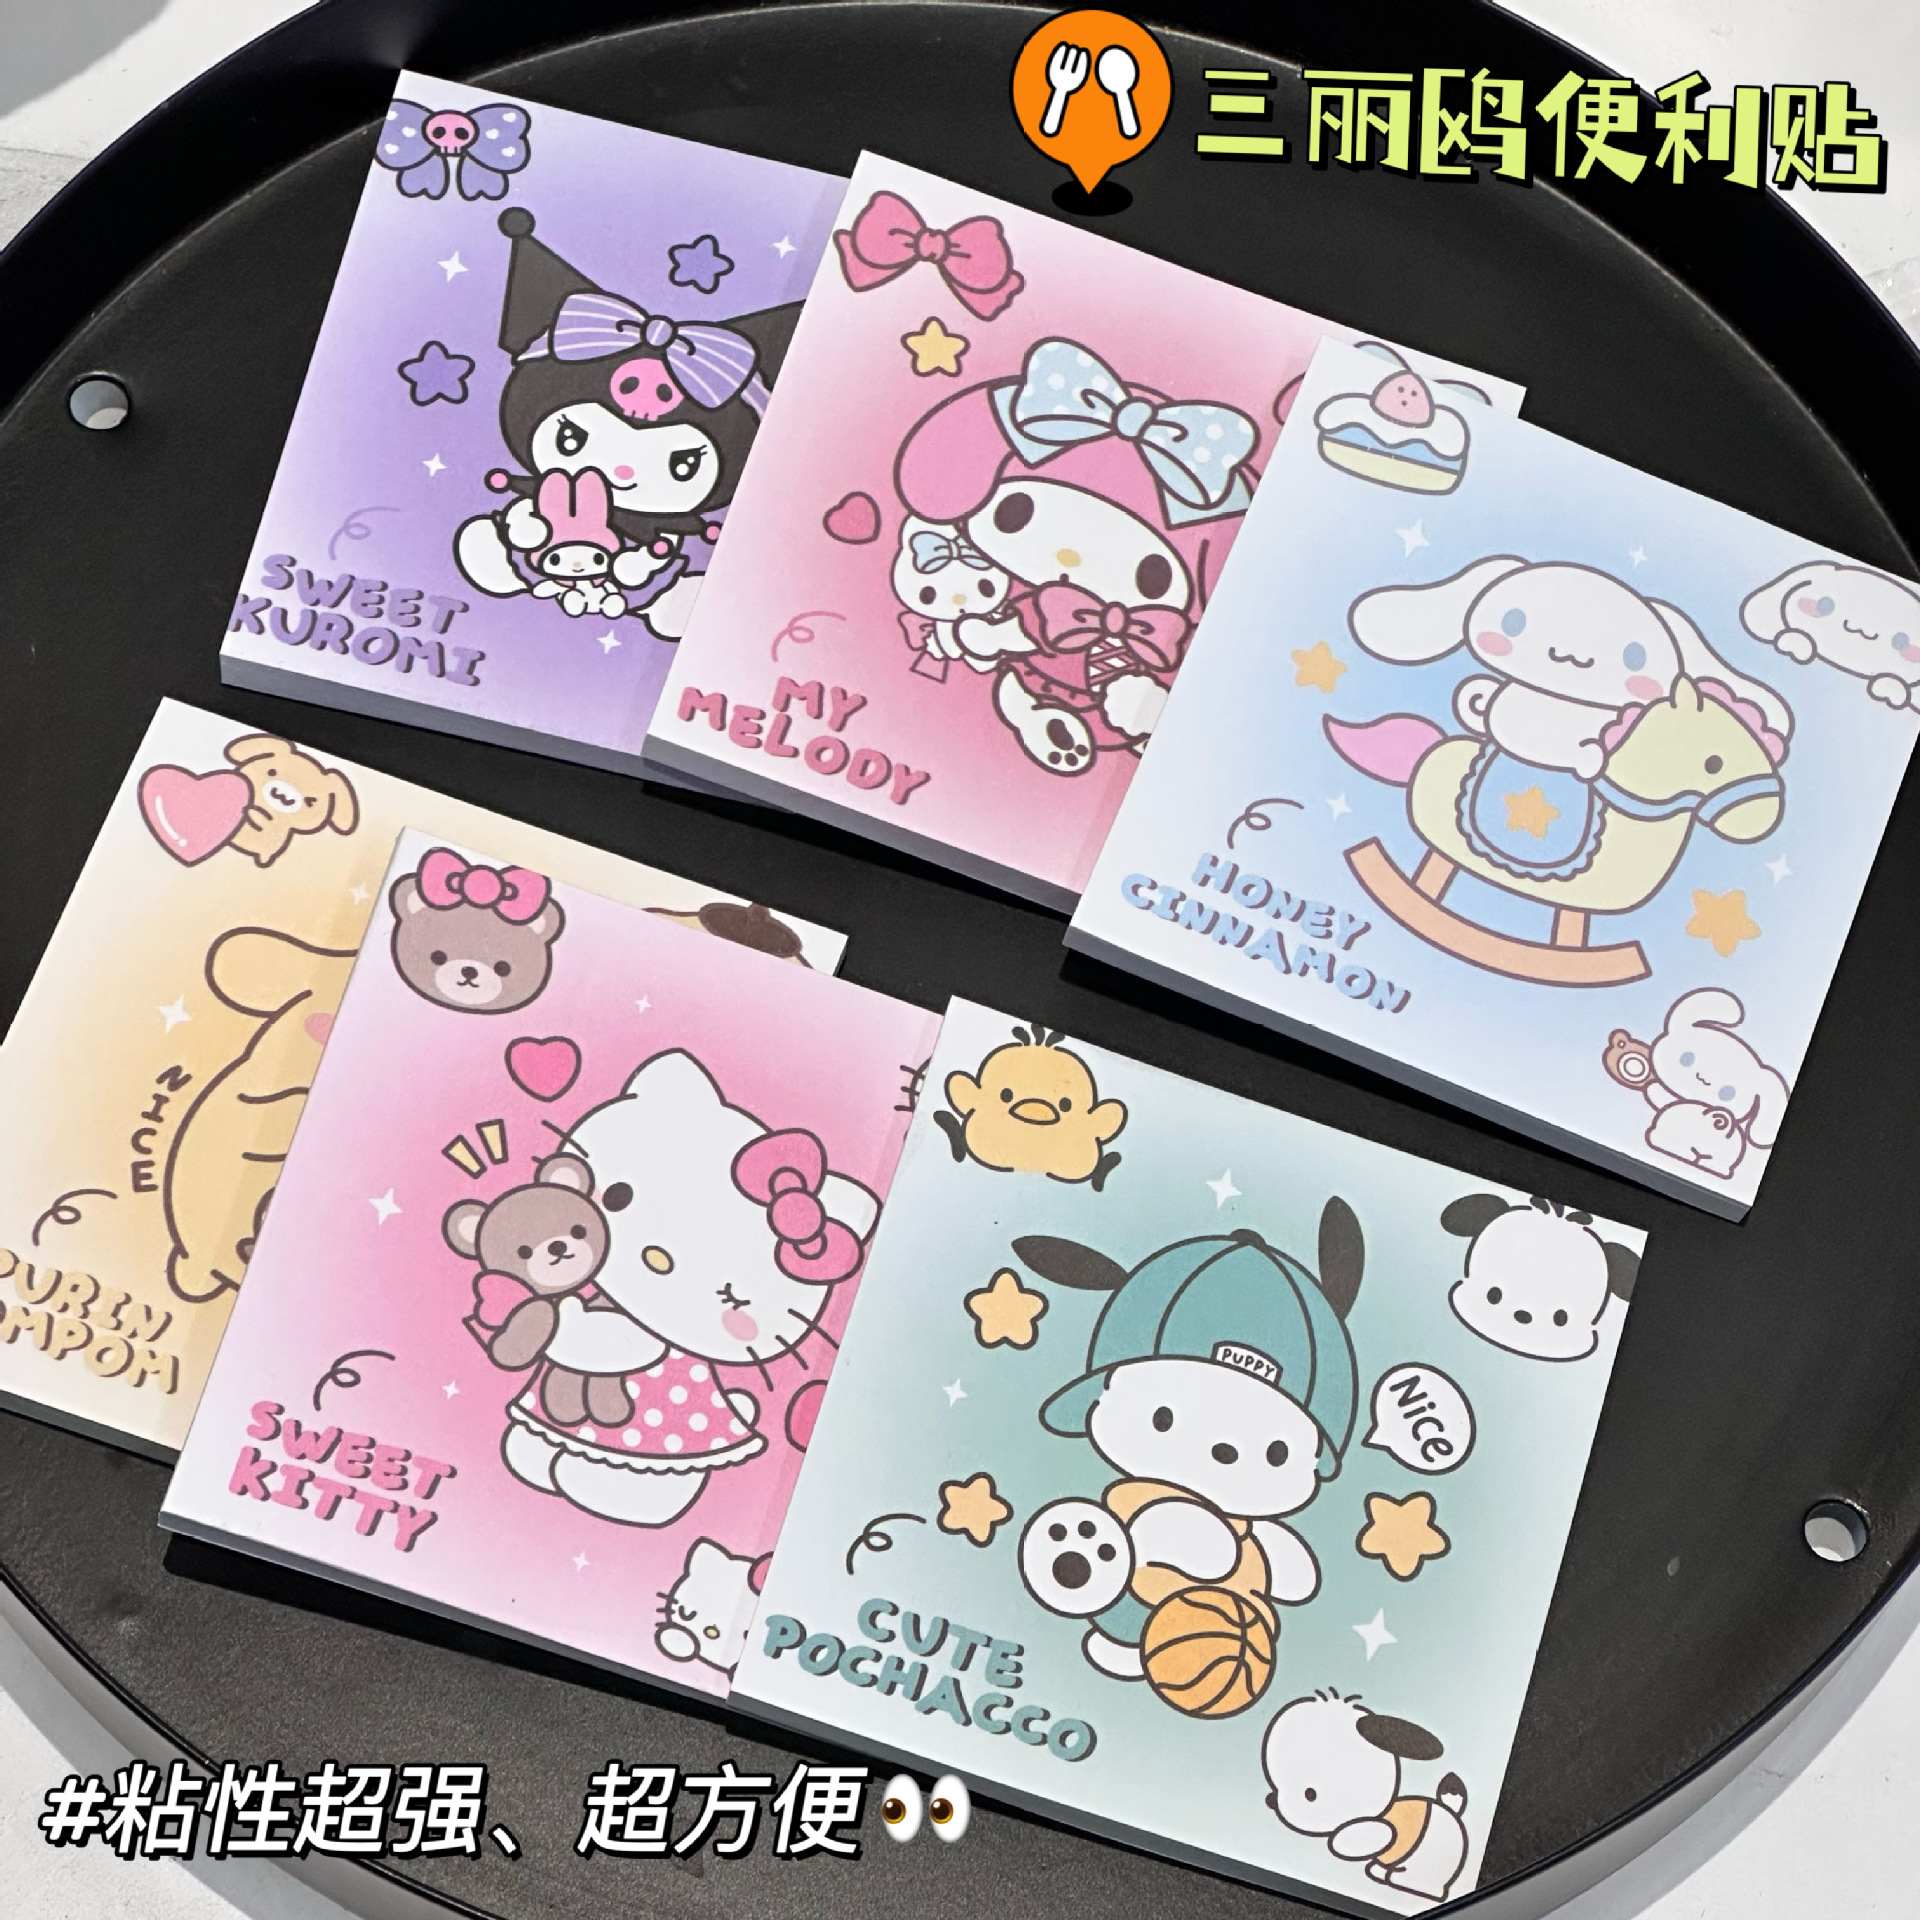 DraggmePartty Cute Girl Journal Sticker Gift Box Pet Kawaii Stationery  Scrapbooking Decoration Material Diary Phone Stickers 